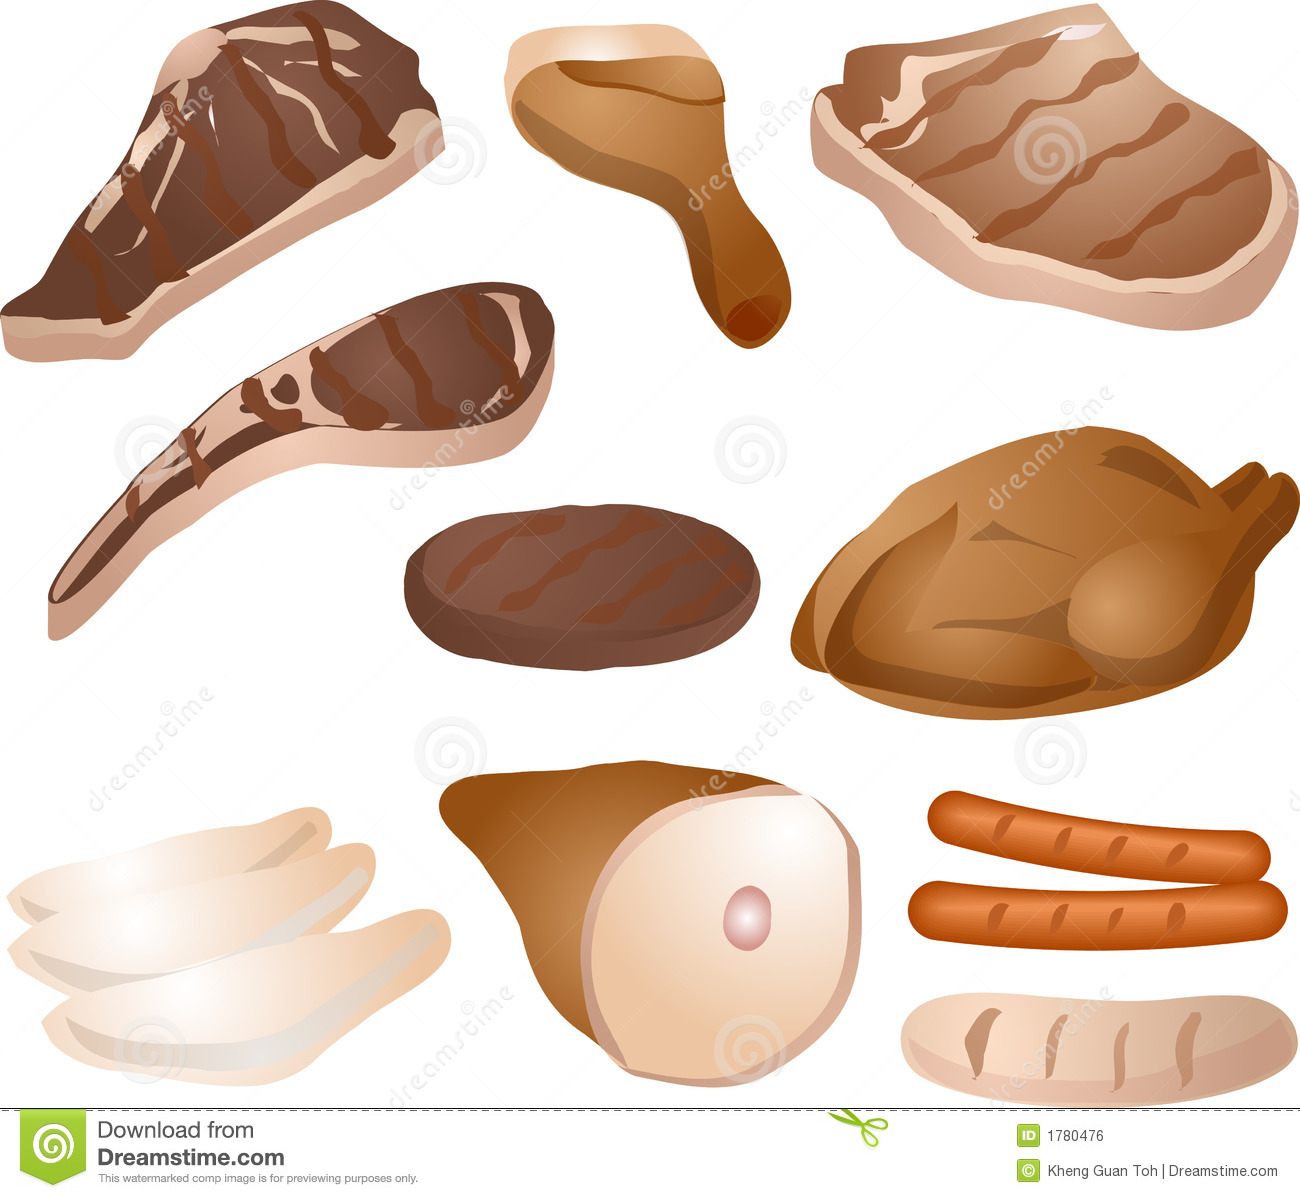 Cooked Meat Illustration Royalty Free Stock Image   Image  1780476